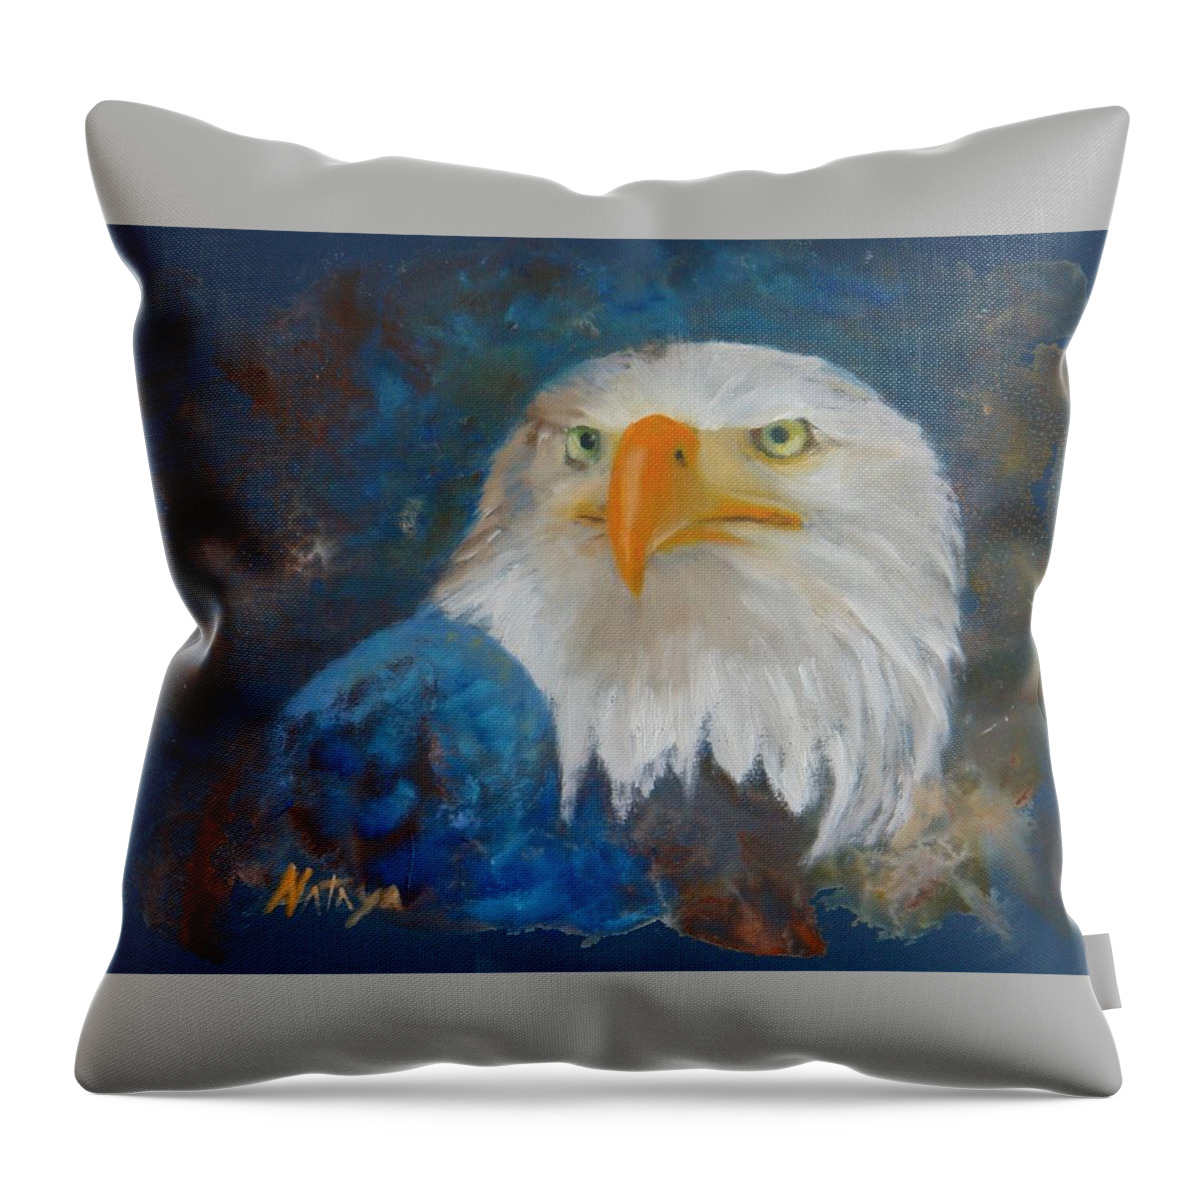 Eagle Throw Pillow featuring the painting Fierce Determination by Nataya Crow